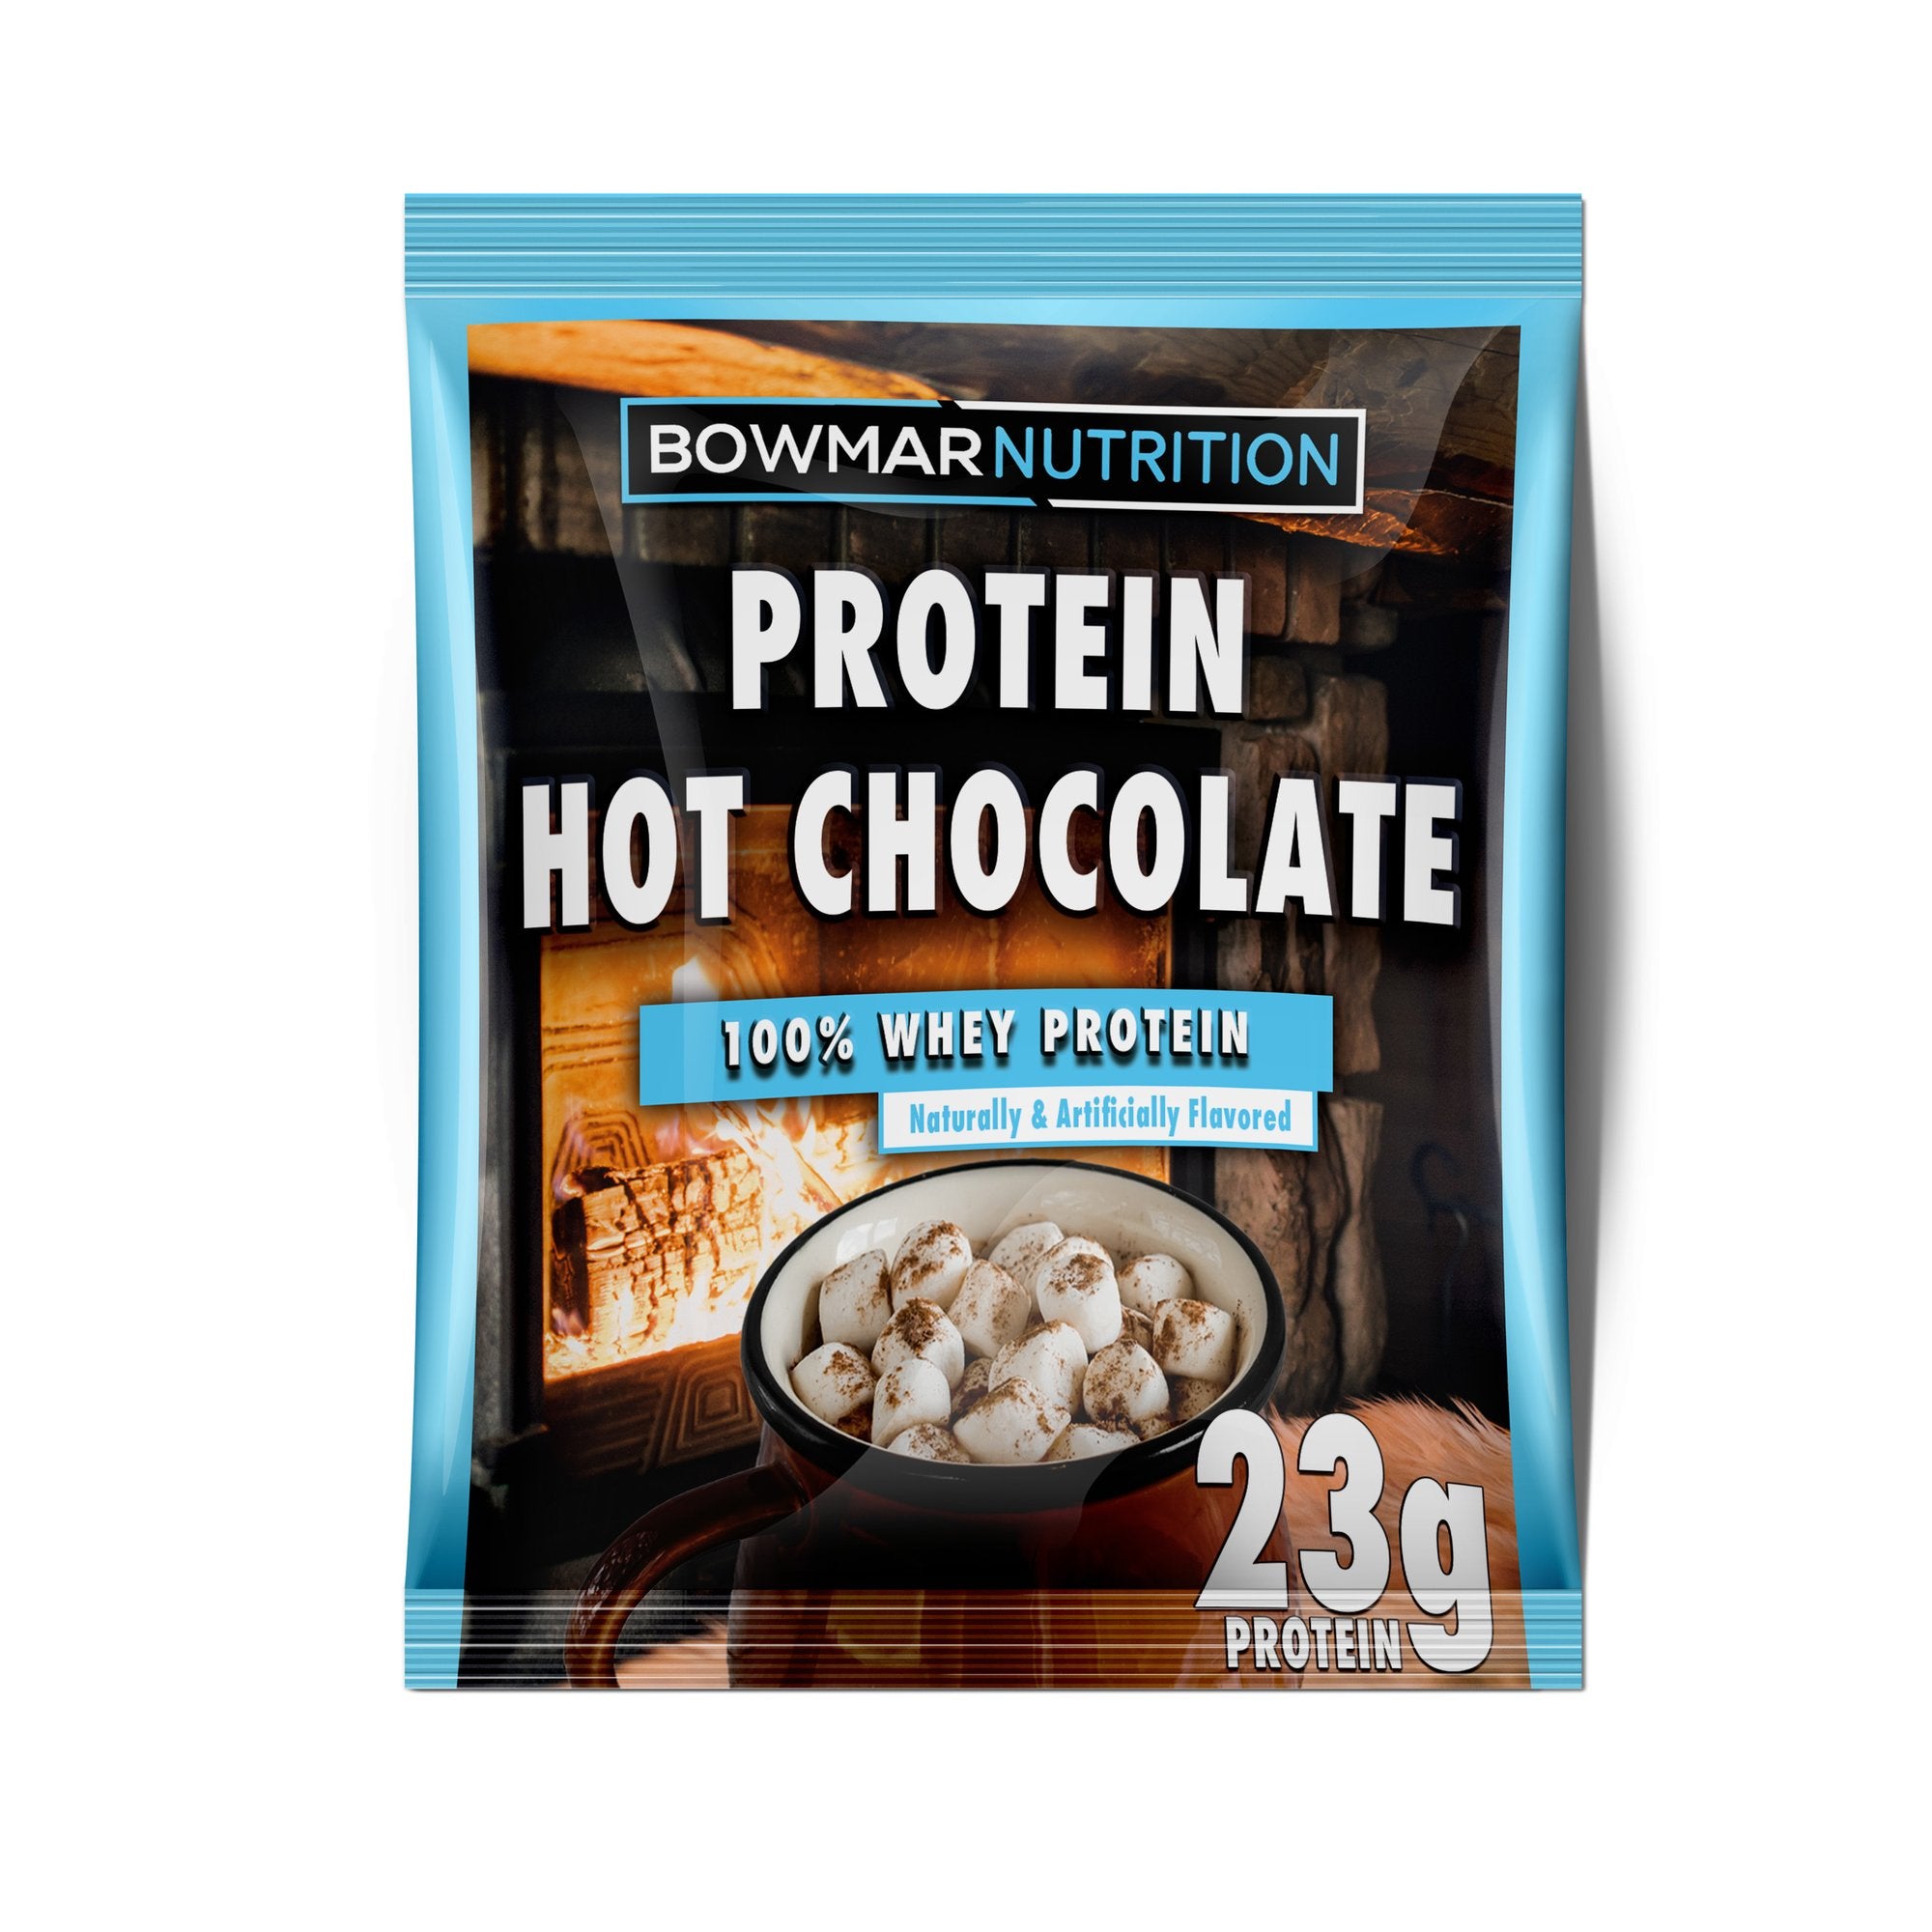 Bowmar Whey Protein Powder Sample (1 serving) Protein Snacks Hot Chocolate bowmar